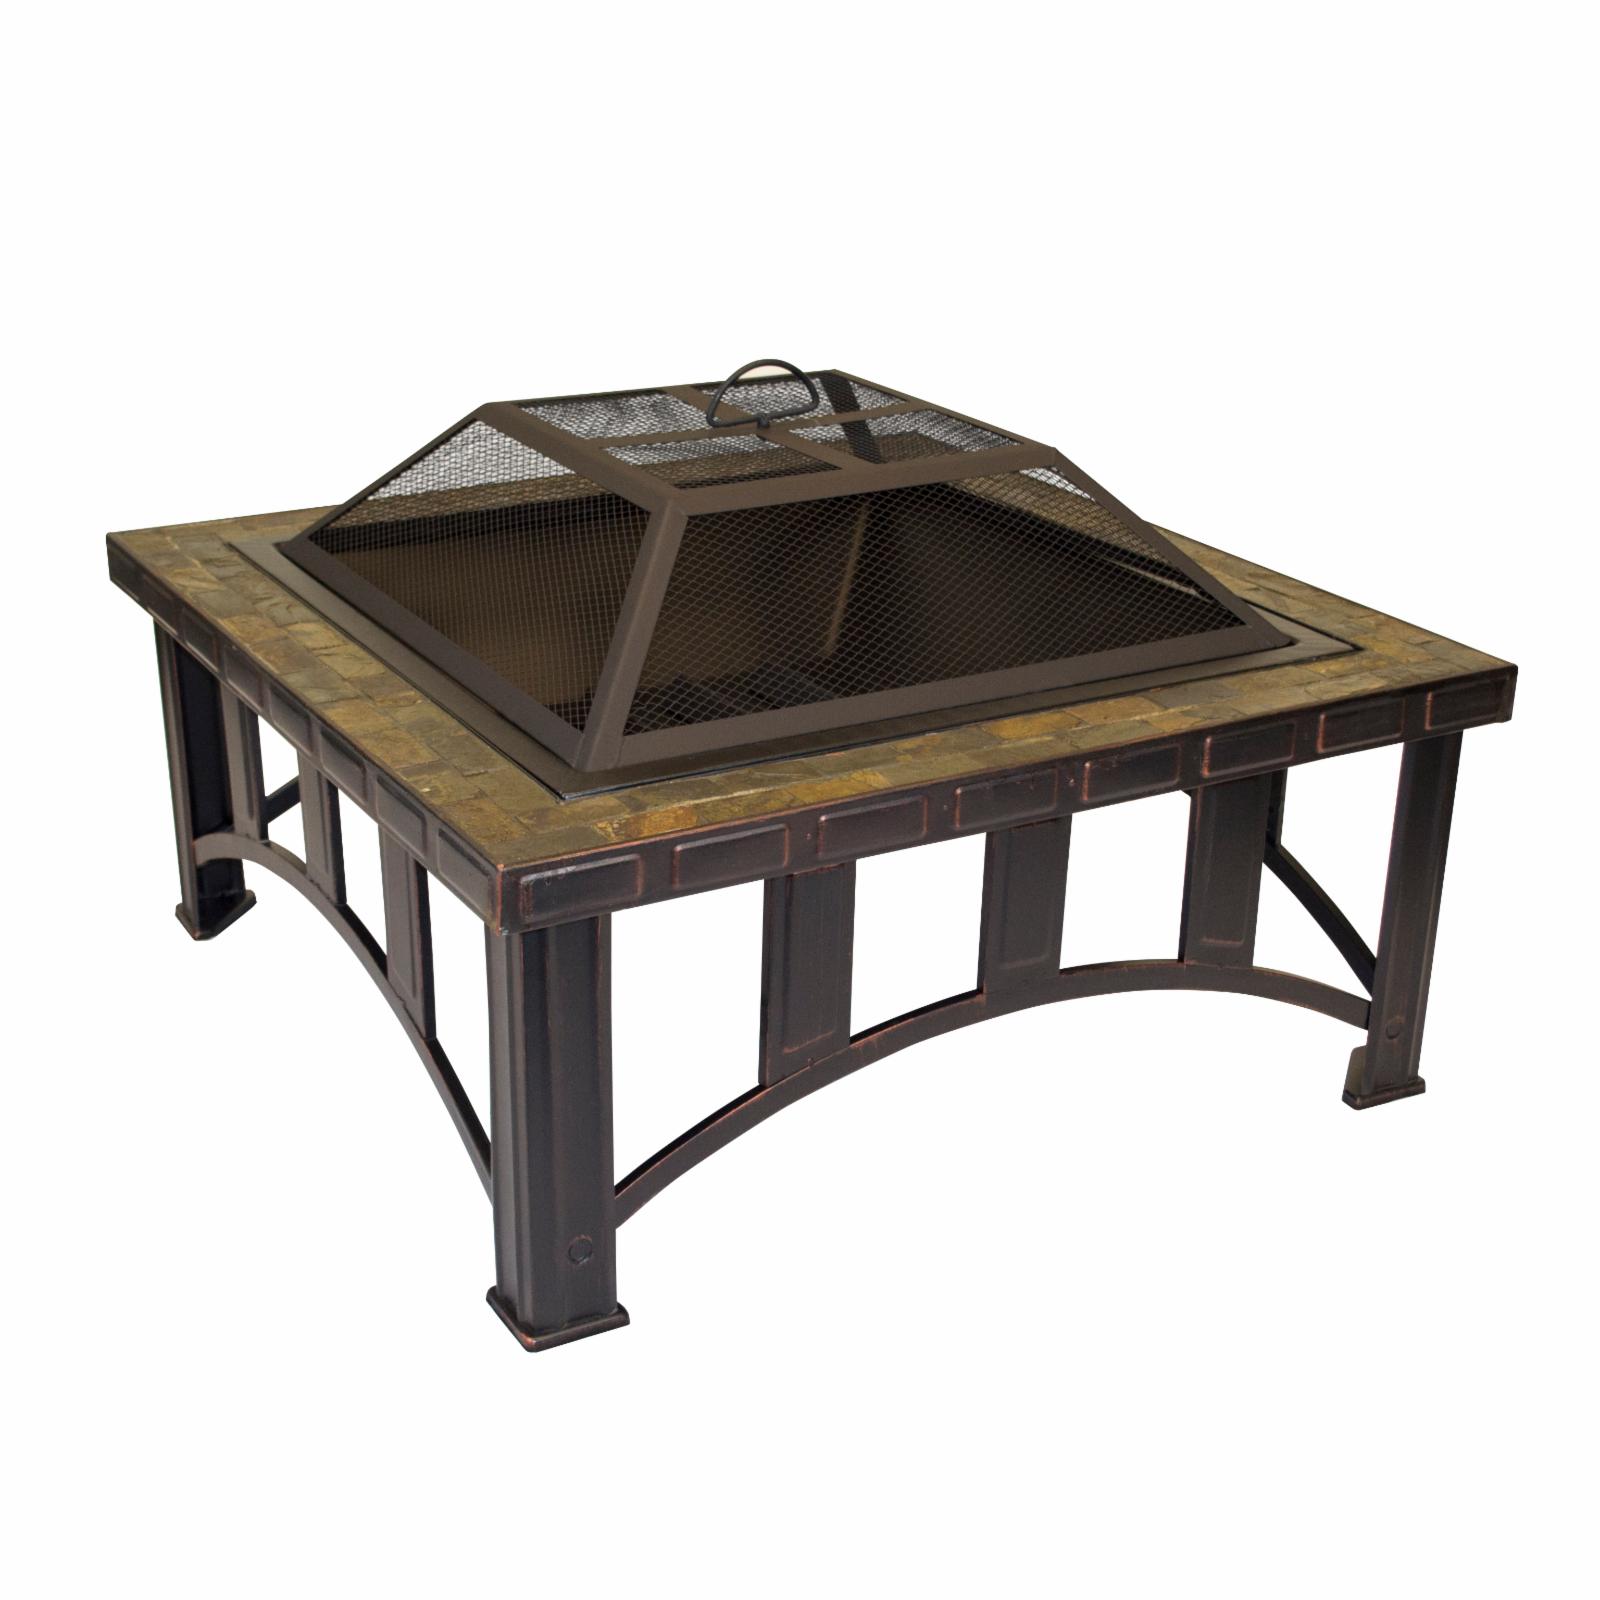 Outdoor Leisure Products Decorative Slate 30 inch Square Steel Fire Pit - image 2 of 7